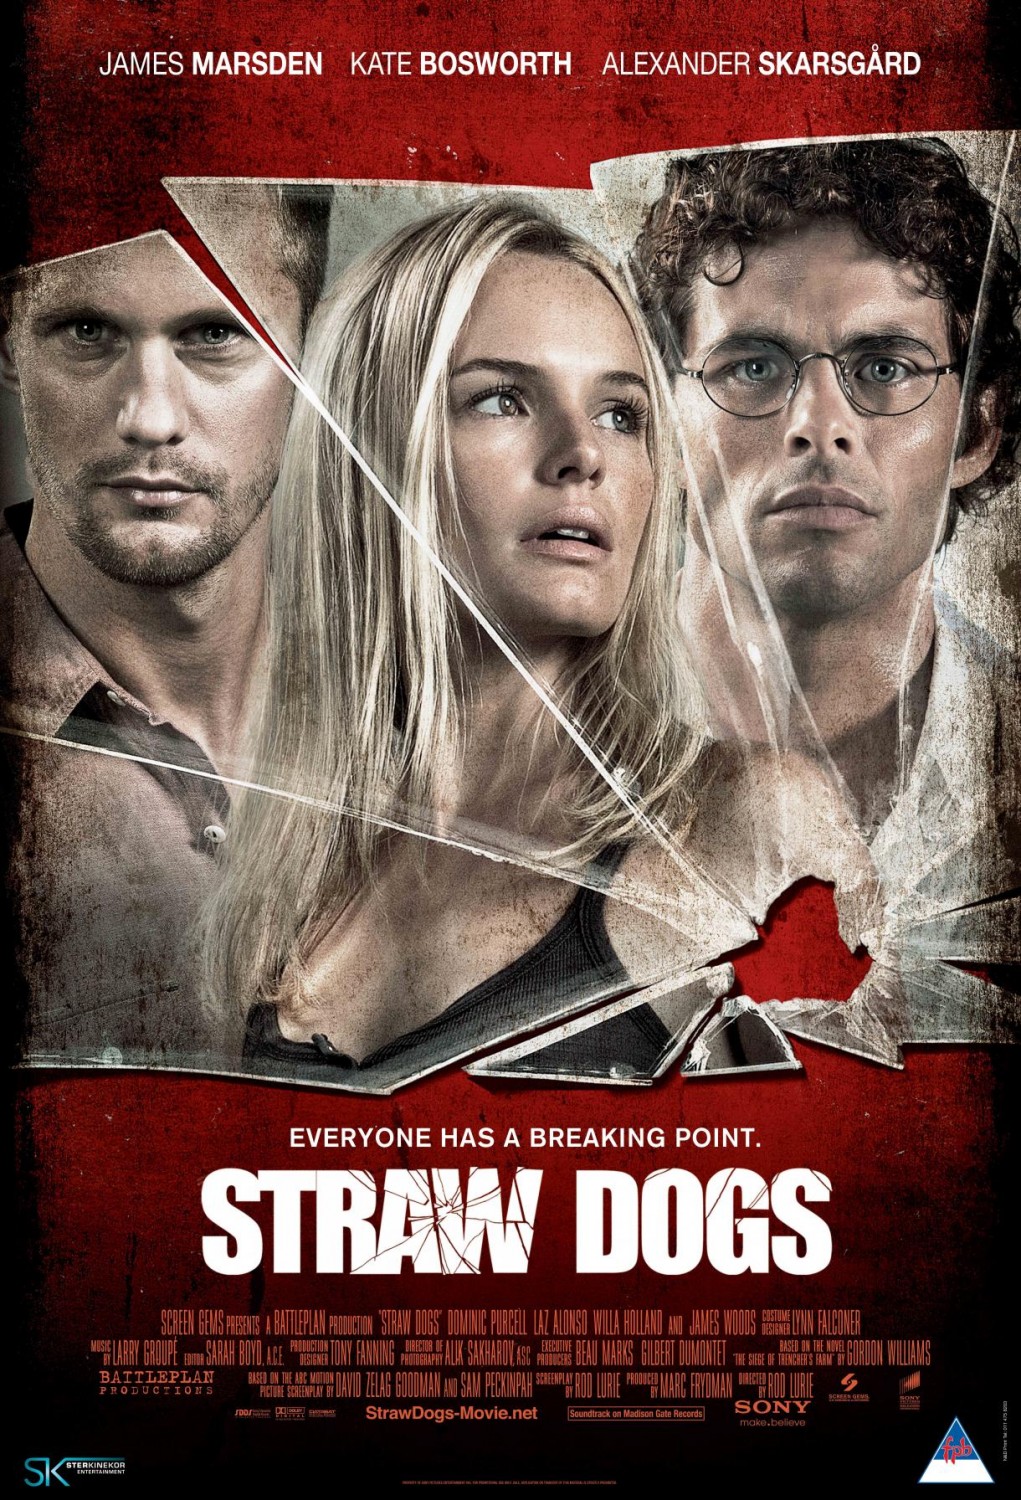 Extra Large Movie Poster Image for Straw Dogs (#7 of 7)